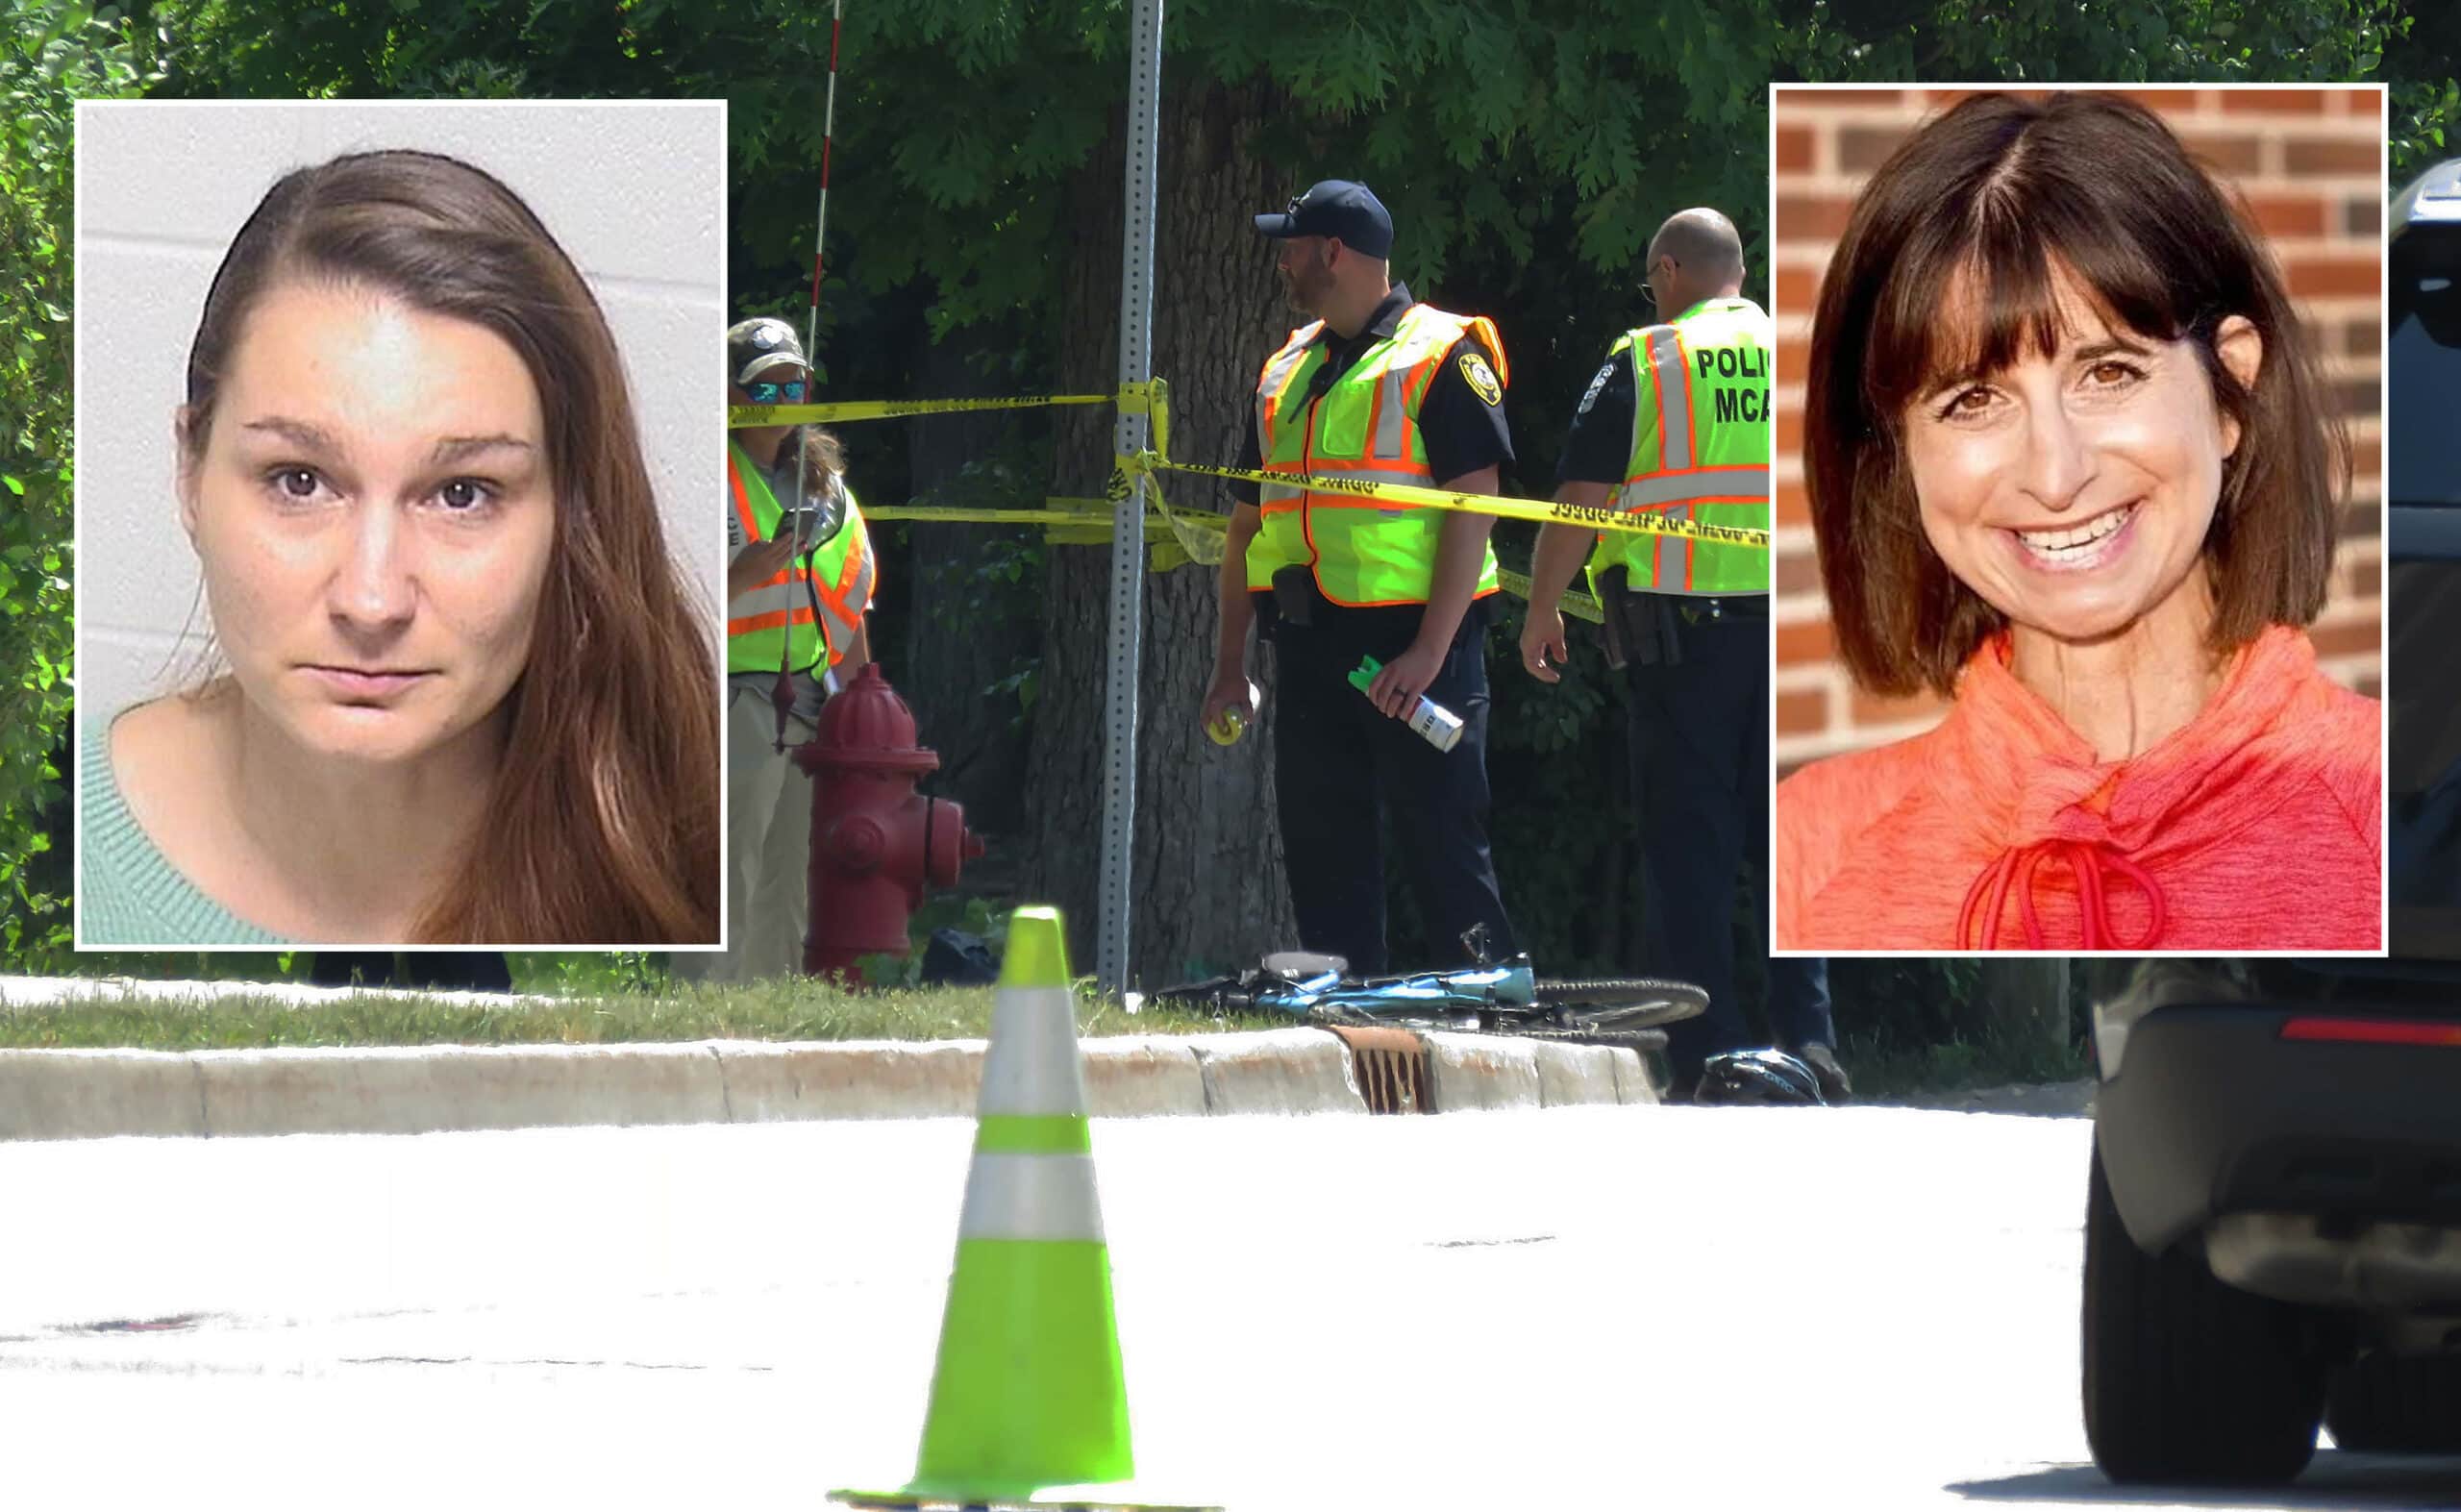 Driver charged in fatal hit-and-run of Deerfield school board member ...